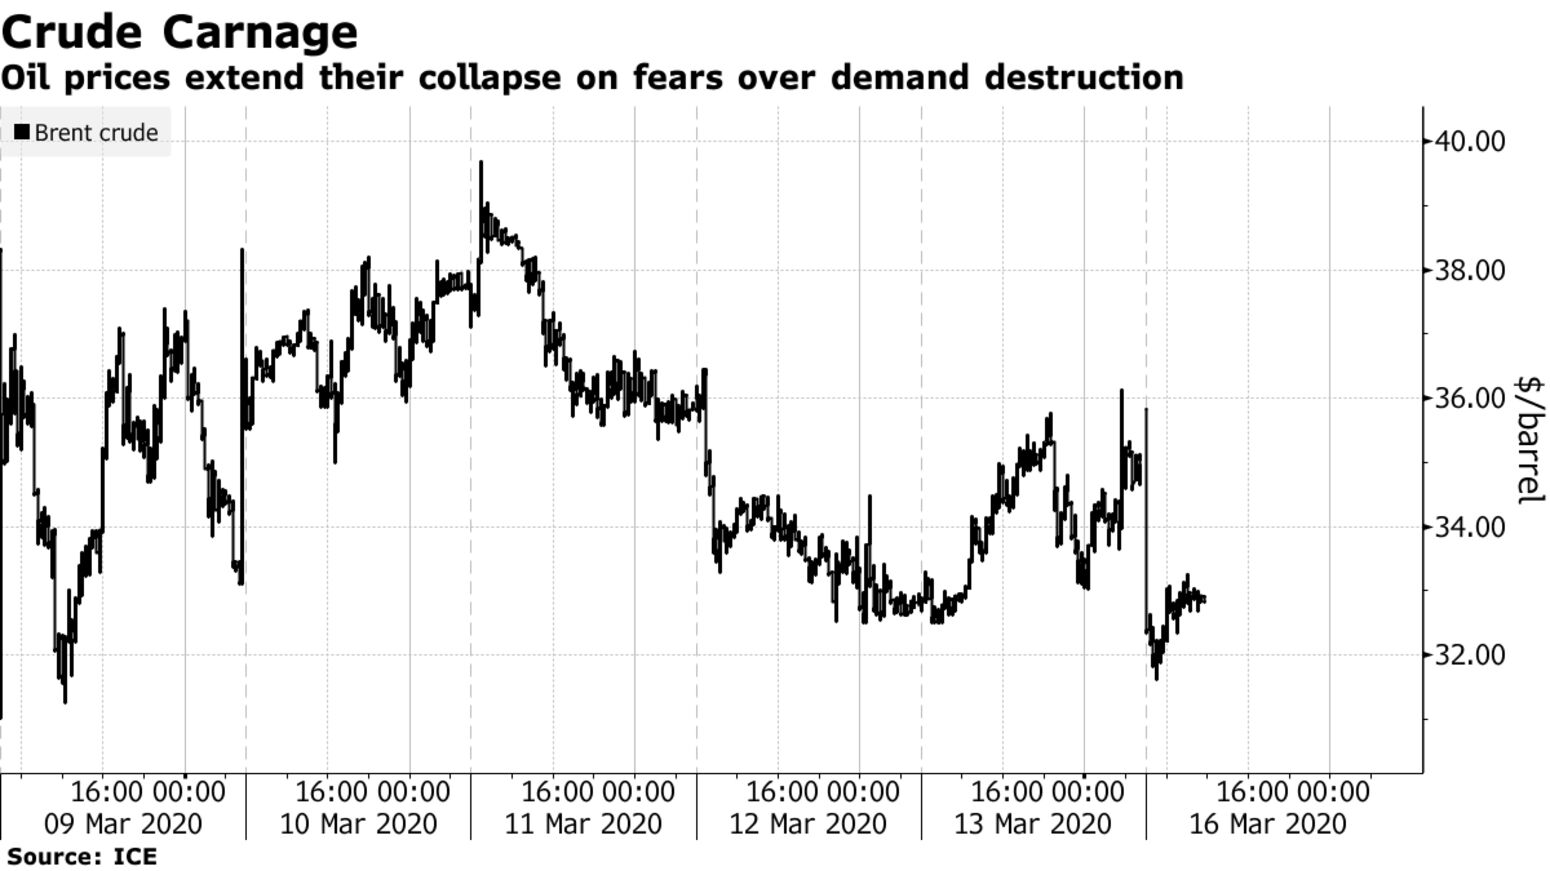 Oil prices extend their collapse on fears over demand destruction